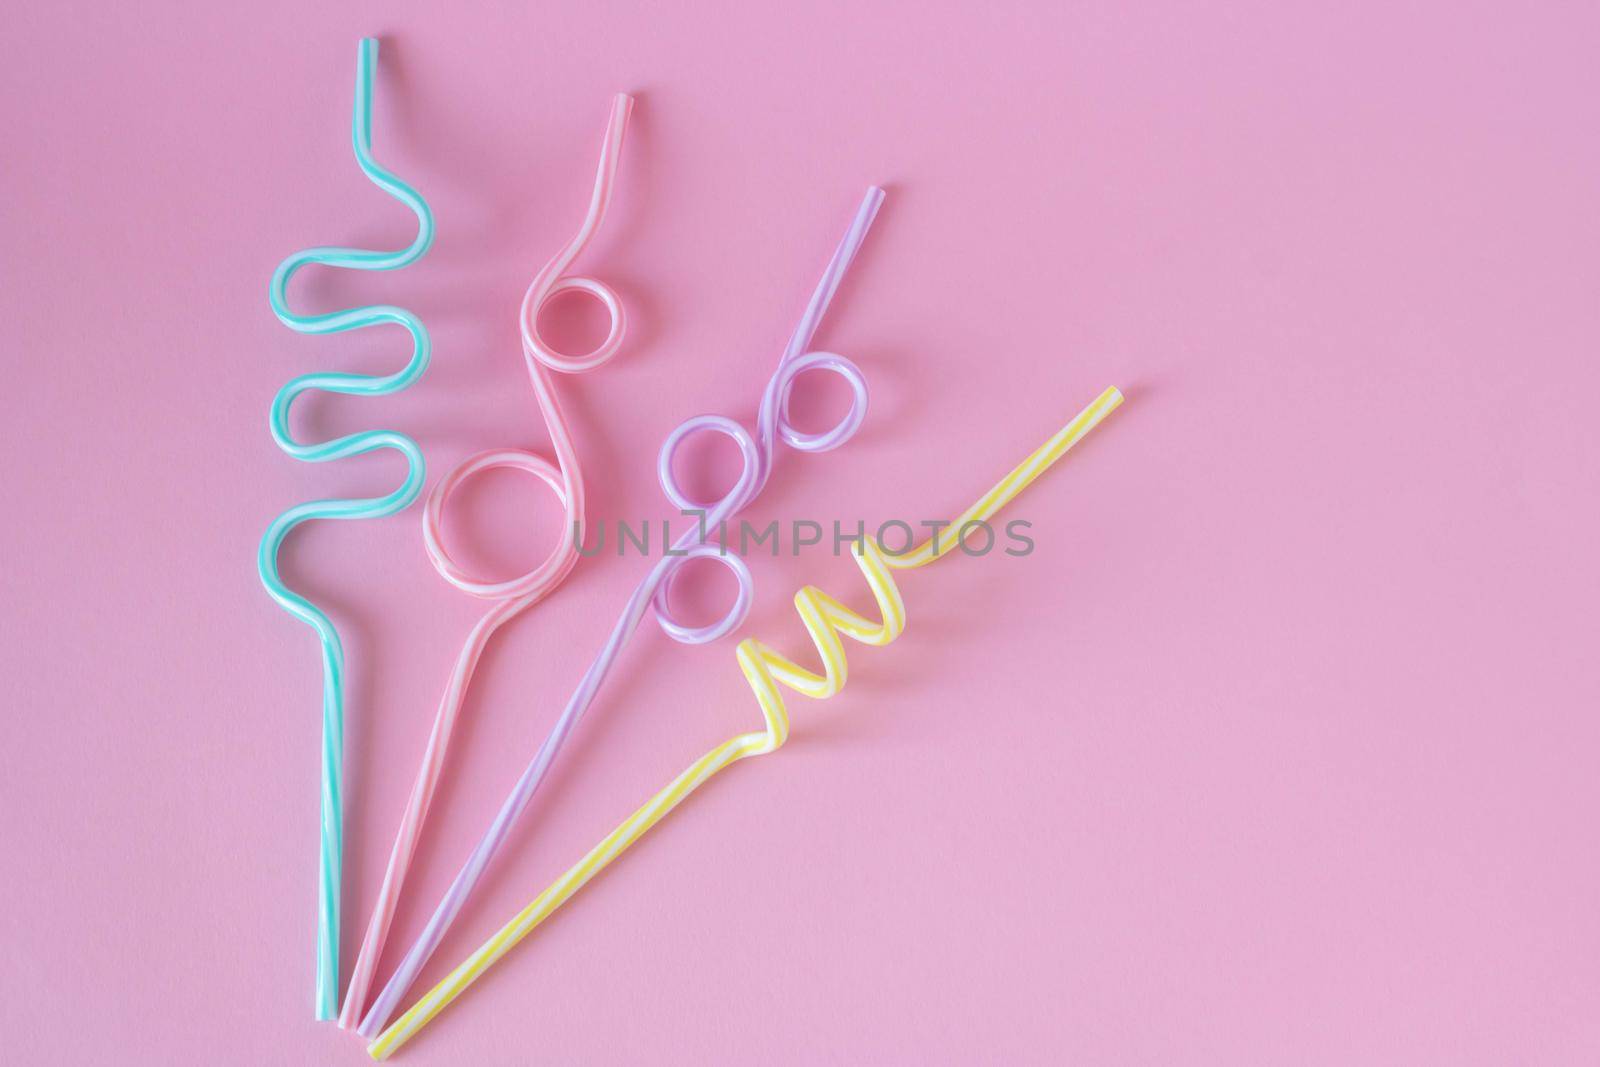 Cocktail straws Day. Drinking straws on a pink background. Summer cocktail party, a fun and happy holiday concept. by lapushka62